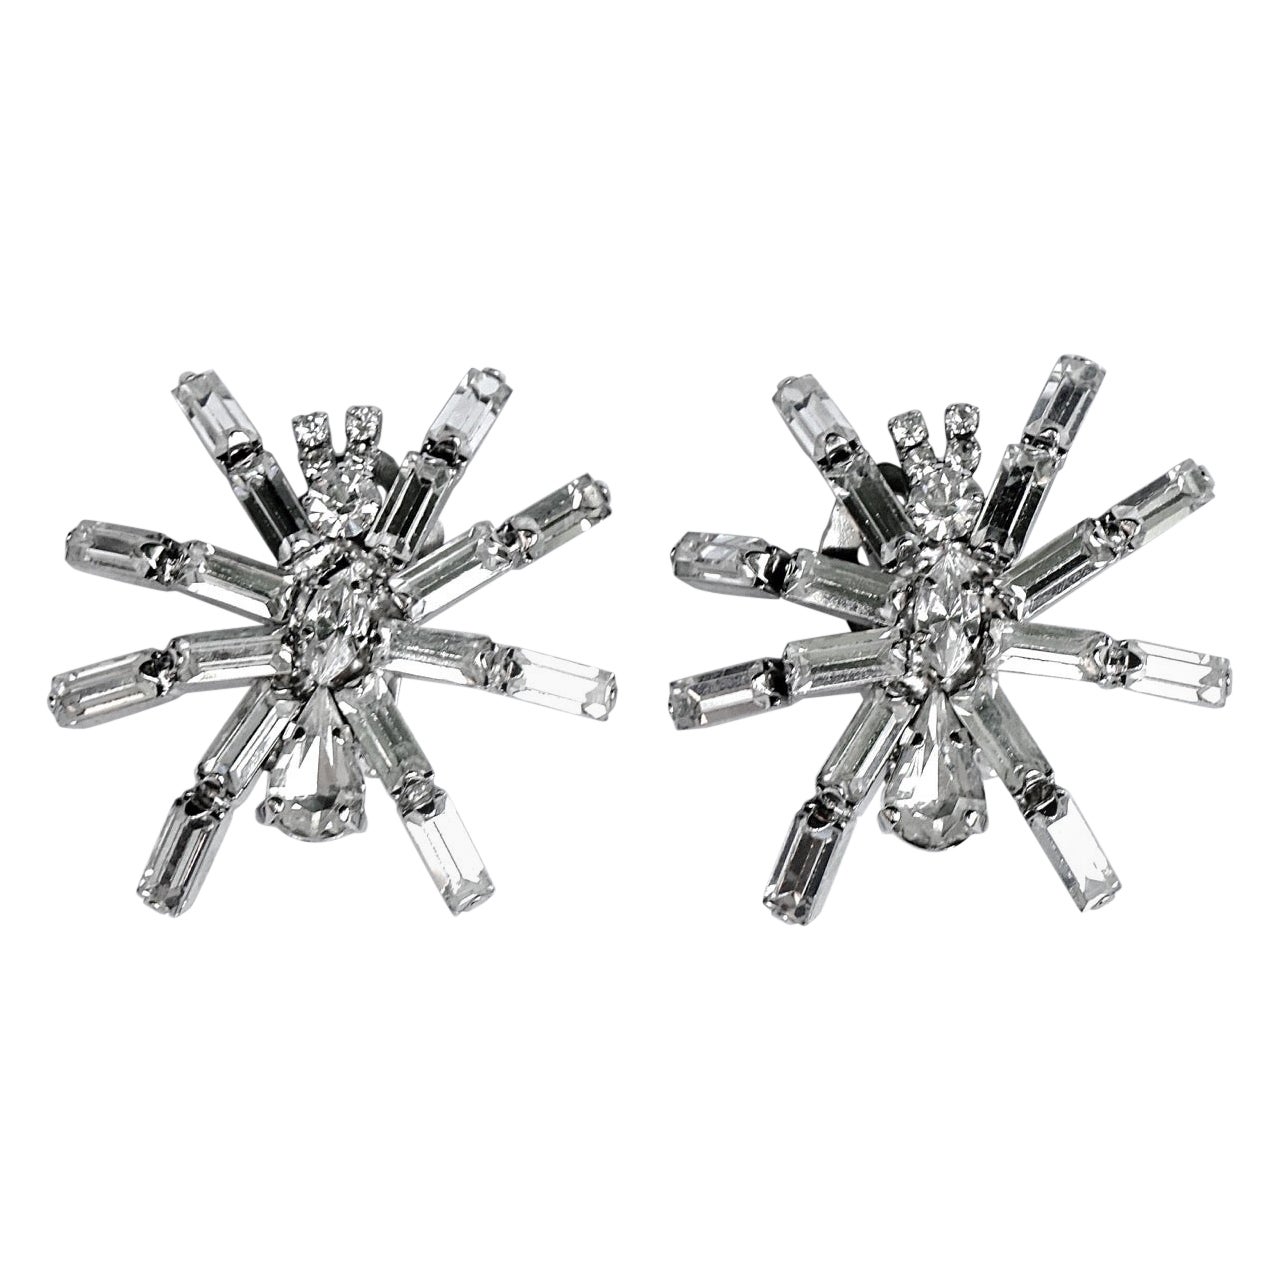 Silver Tone and Clear Rhinestone Clip On Spider Earrings, circa 1980s For Sale